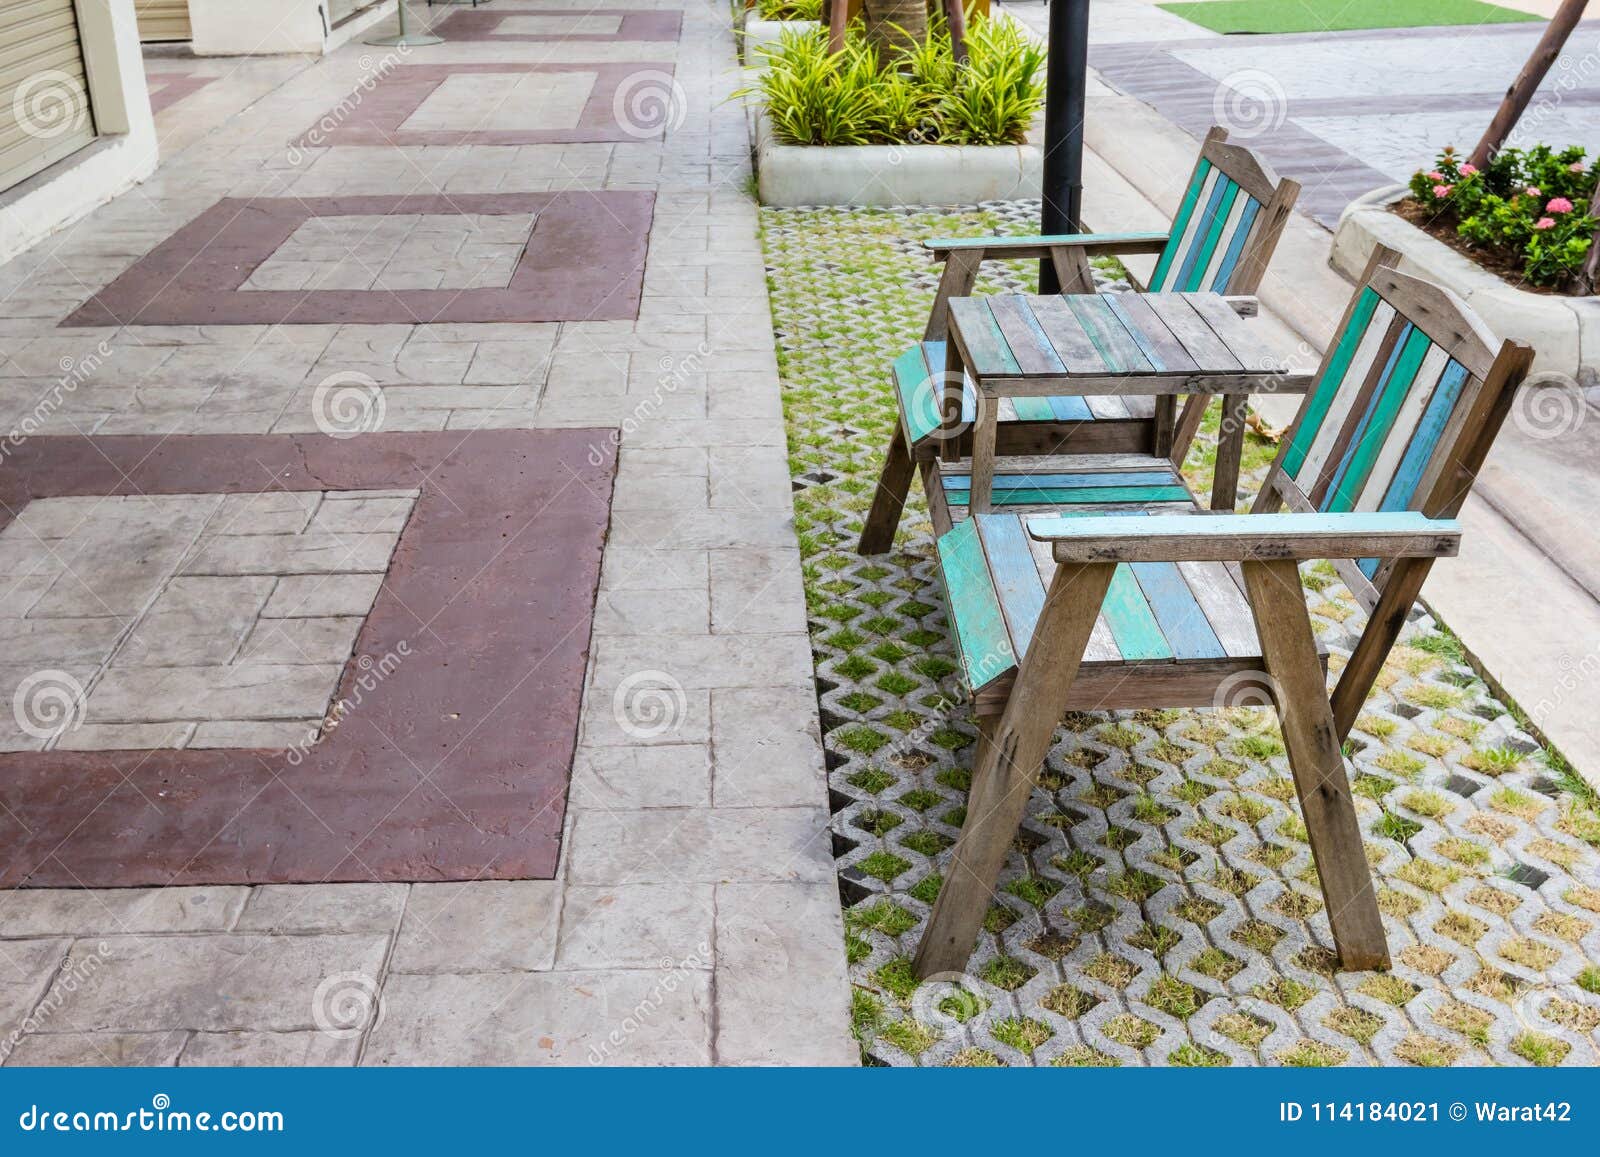 Old Wooden Chairs Outdoors With Bricks Floor Stock Image Image